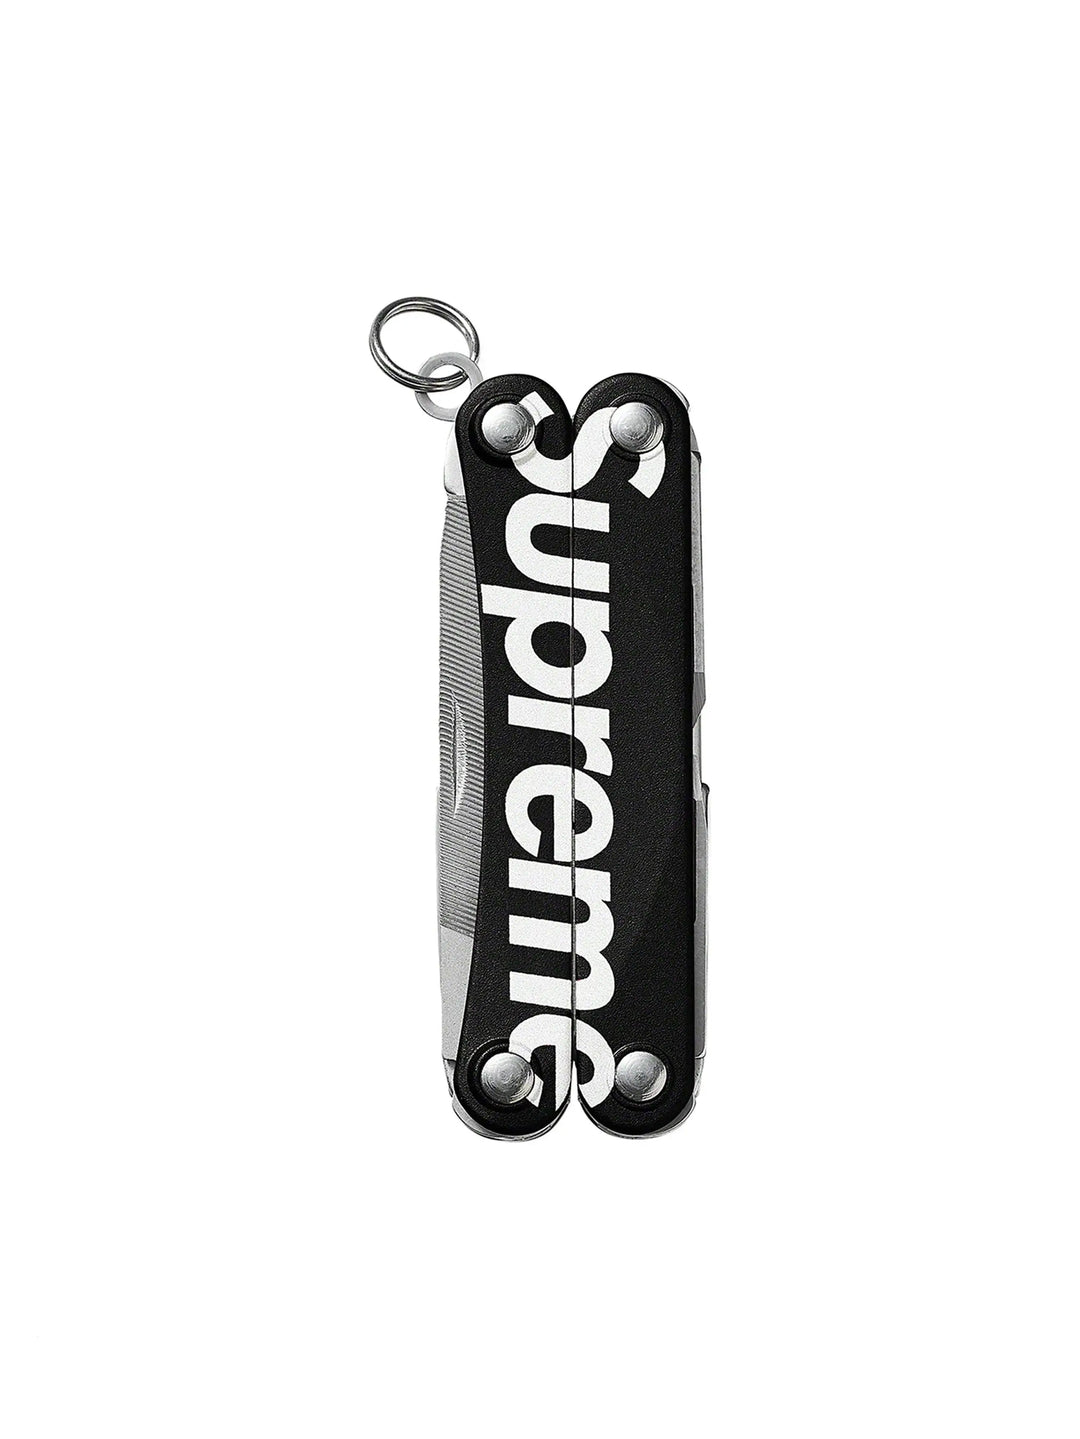 Supreme Leatherman Squirt PS4 Multitool Black in Auckland, New Zealand - Shop name